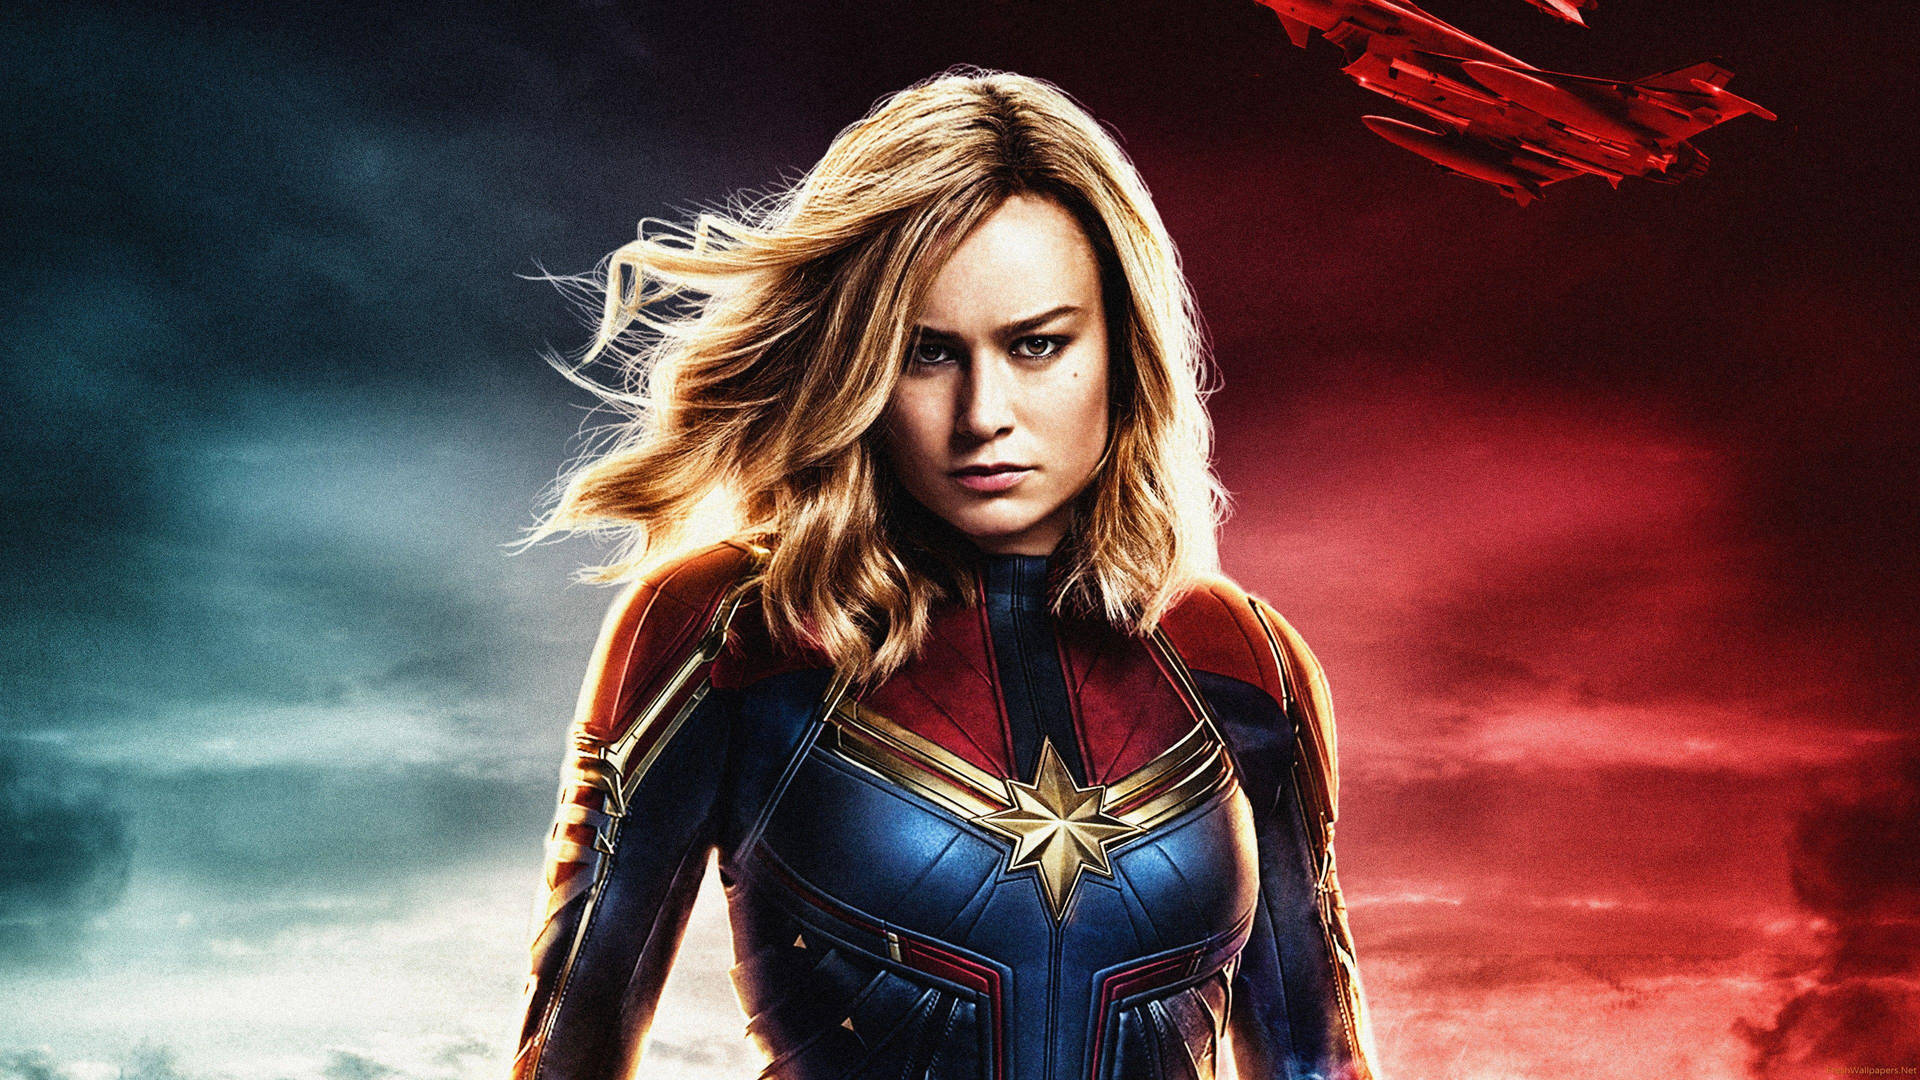 Top 999+ Captain Marvel Wallpaper Full HD, 4K✓Free to Use